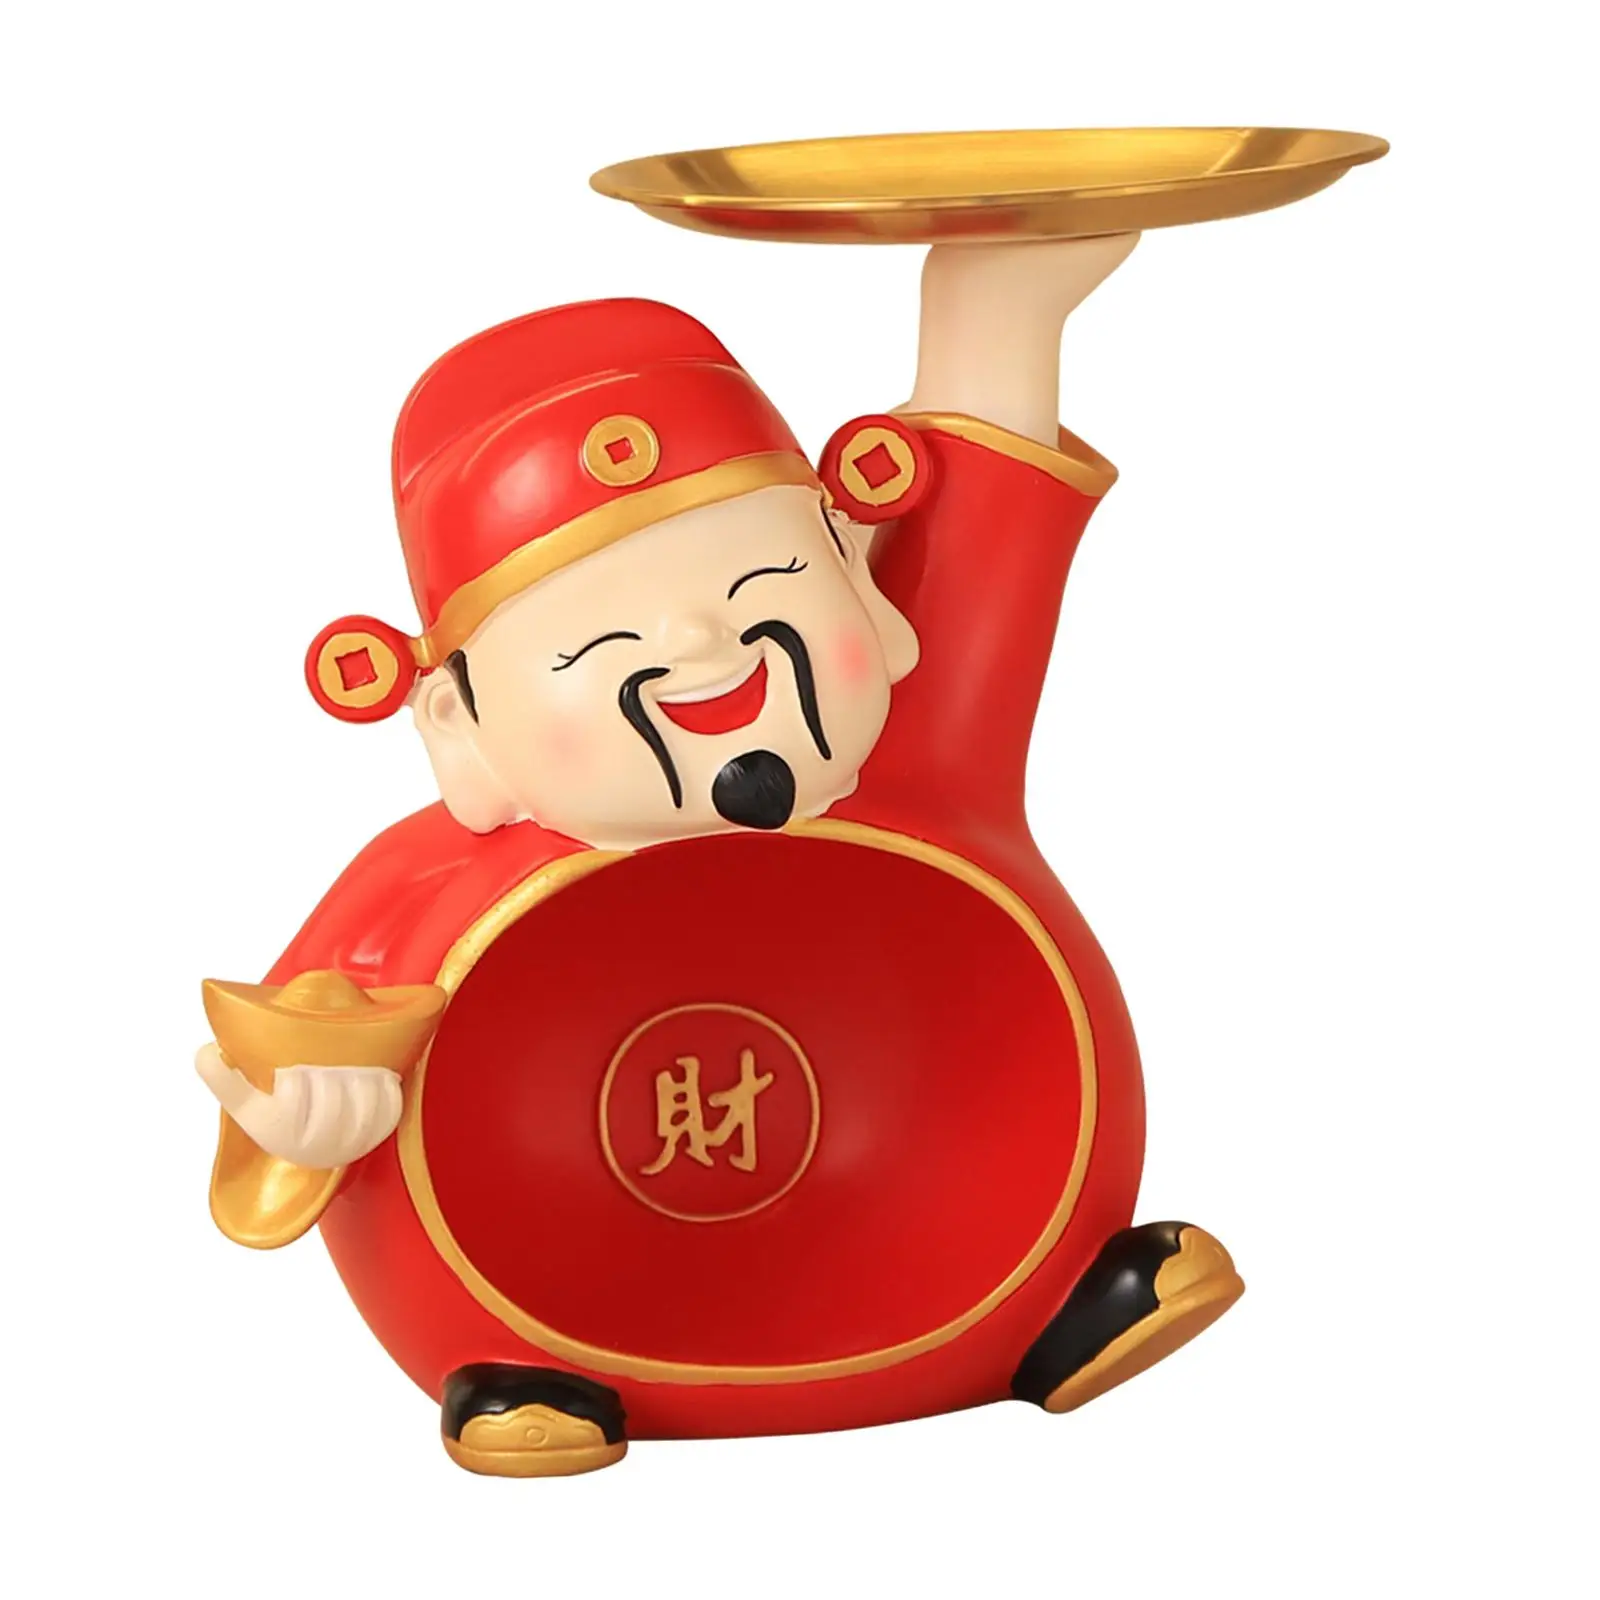 God of Fortune Figurine Sculpture Creative Storage Tray Resin Candy Bowl